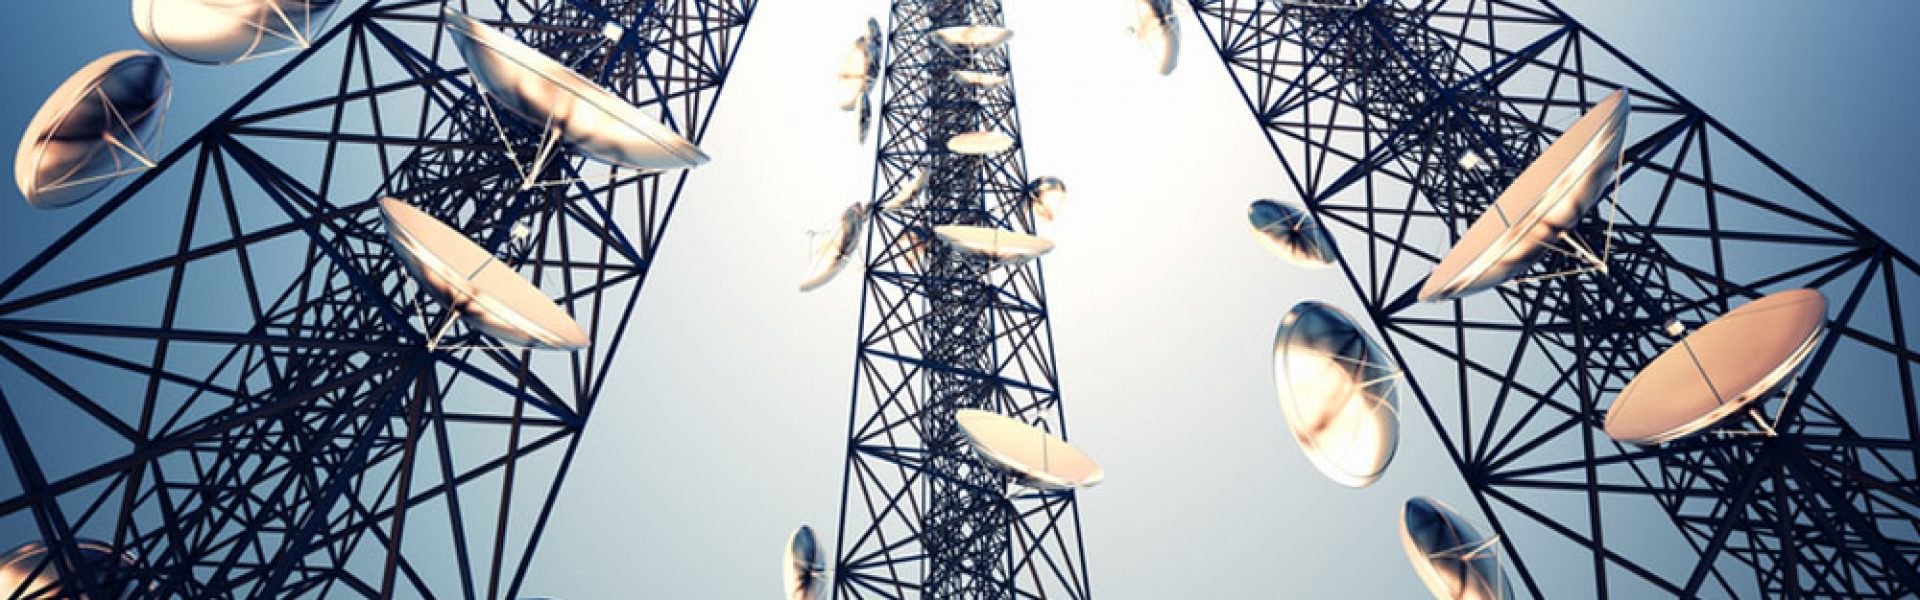 Three tall telecommunication towers with antennas on blue sky. View from the bottom.